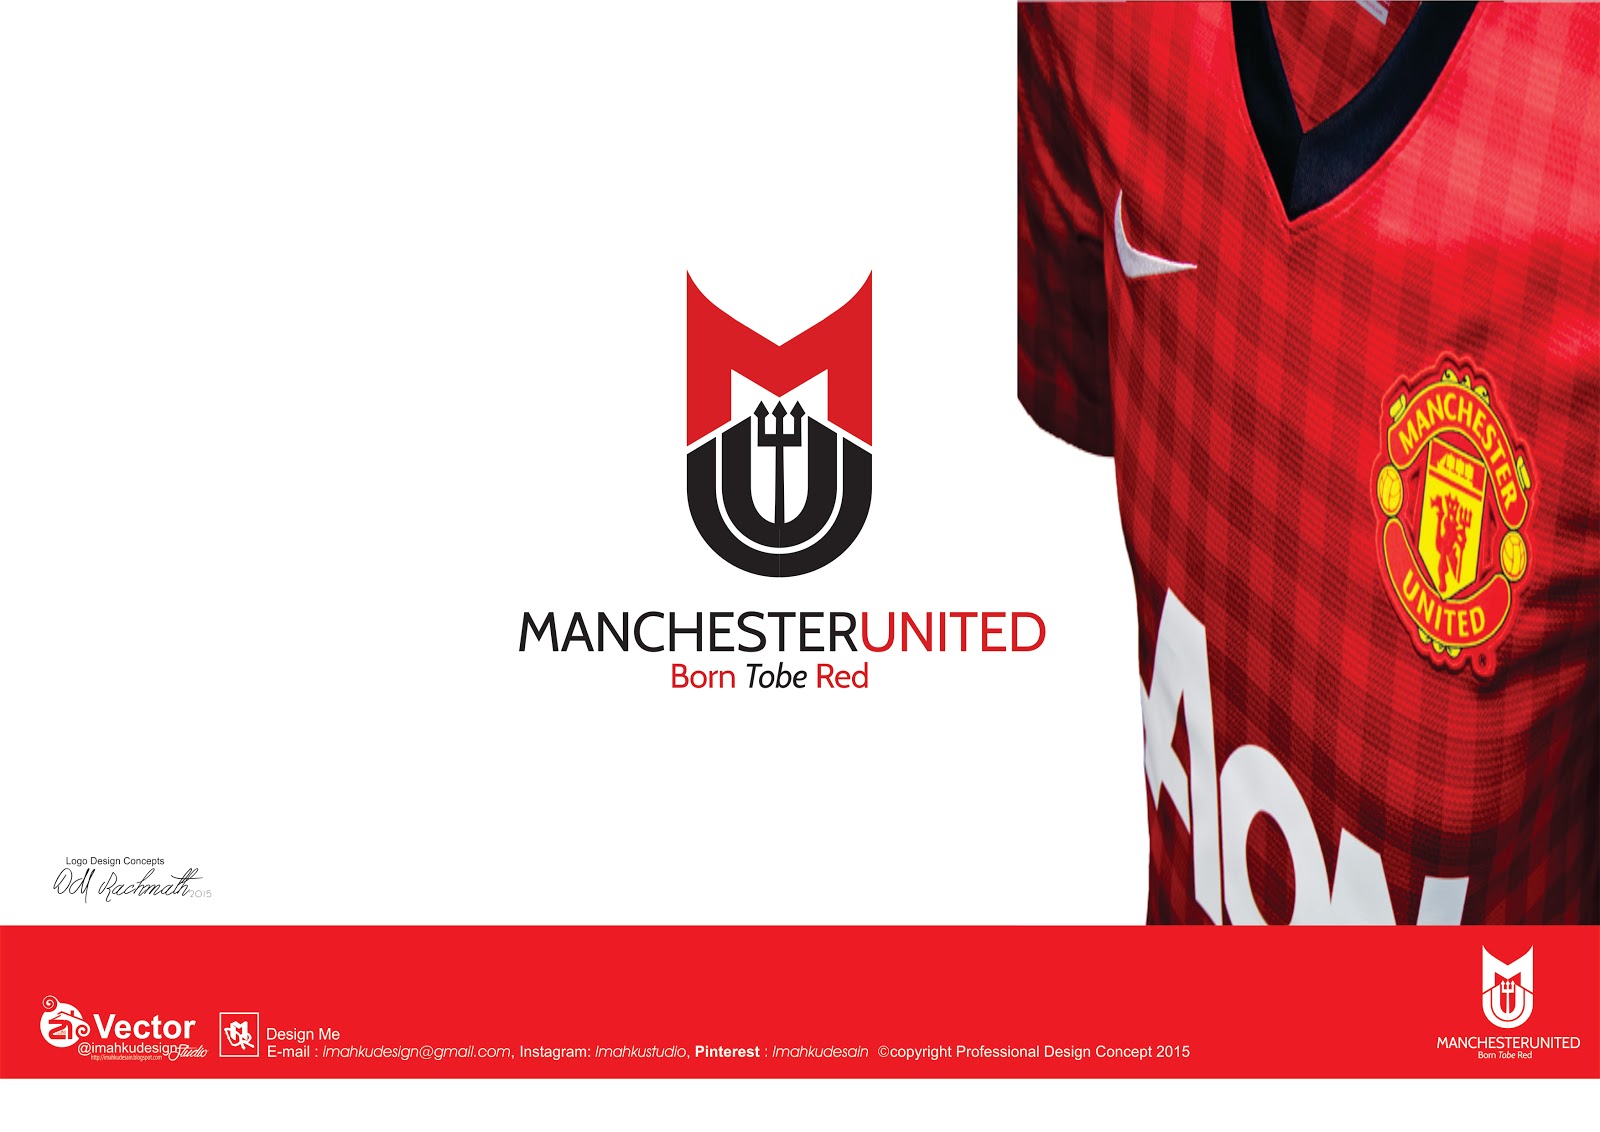 MANCHESTER UNITED LOGO VECTOR (AI,EPS,CDR) FREE DOWNLOAD ...